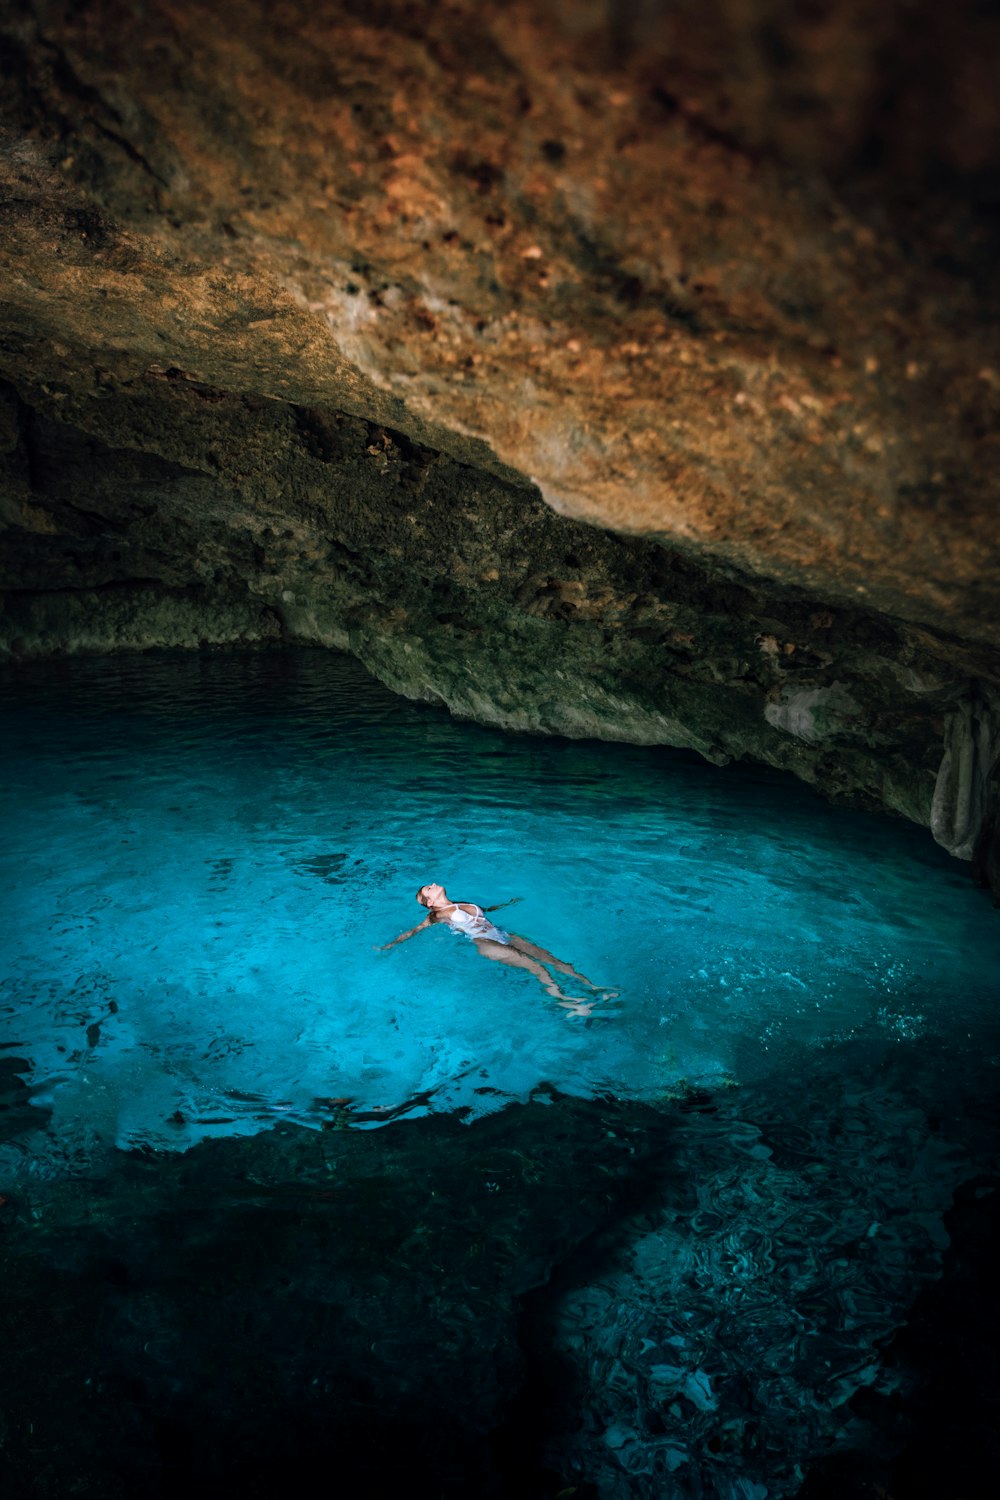 woman swimming under cave